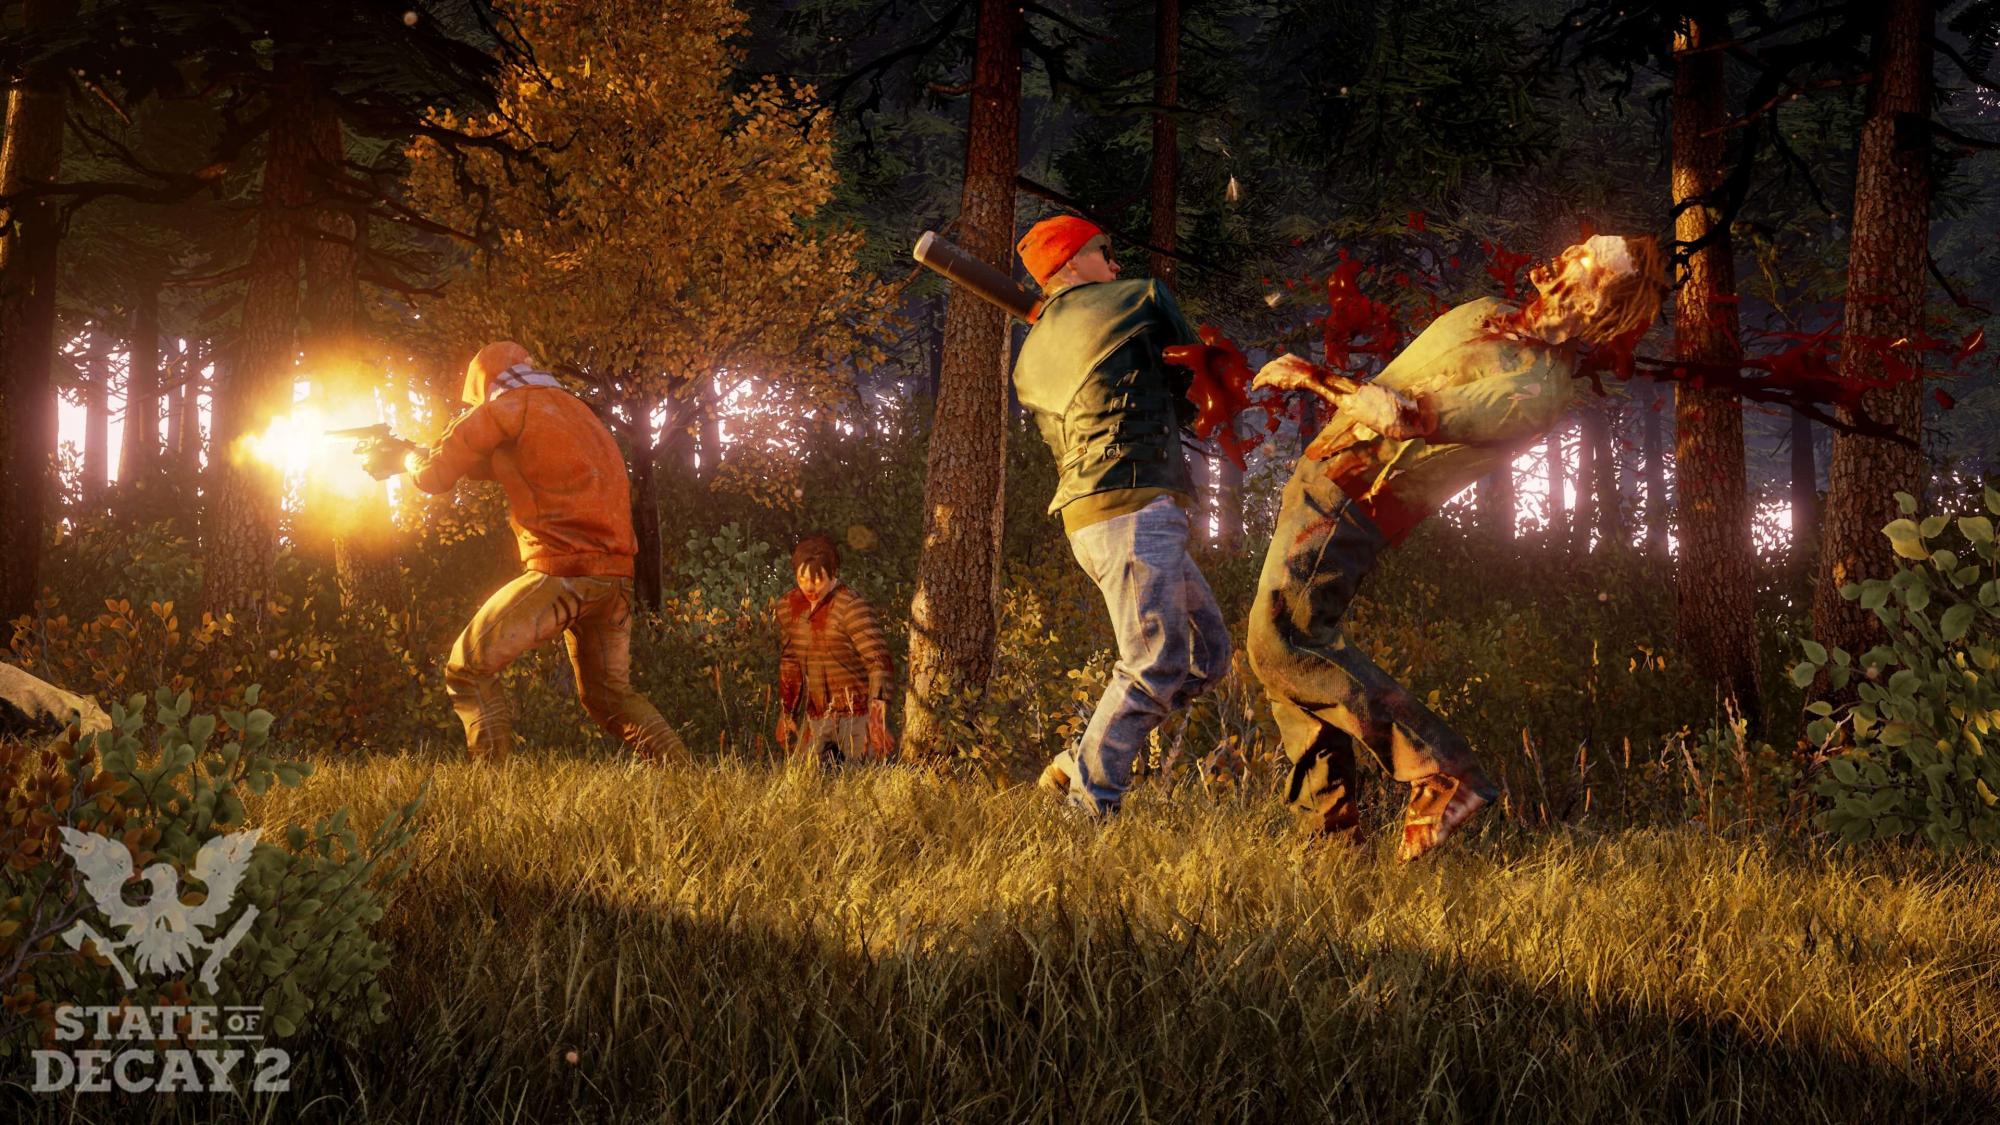 State of Decay 2: Juggernaut Edition (+14 Trainer) [FLiNG]